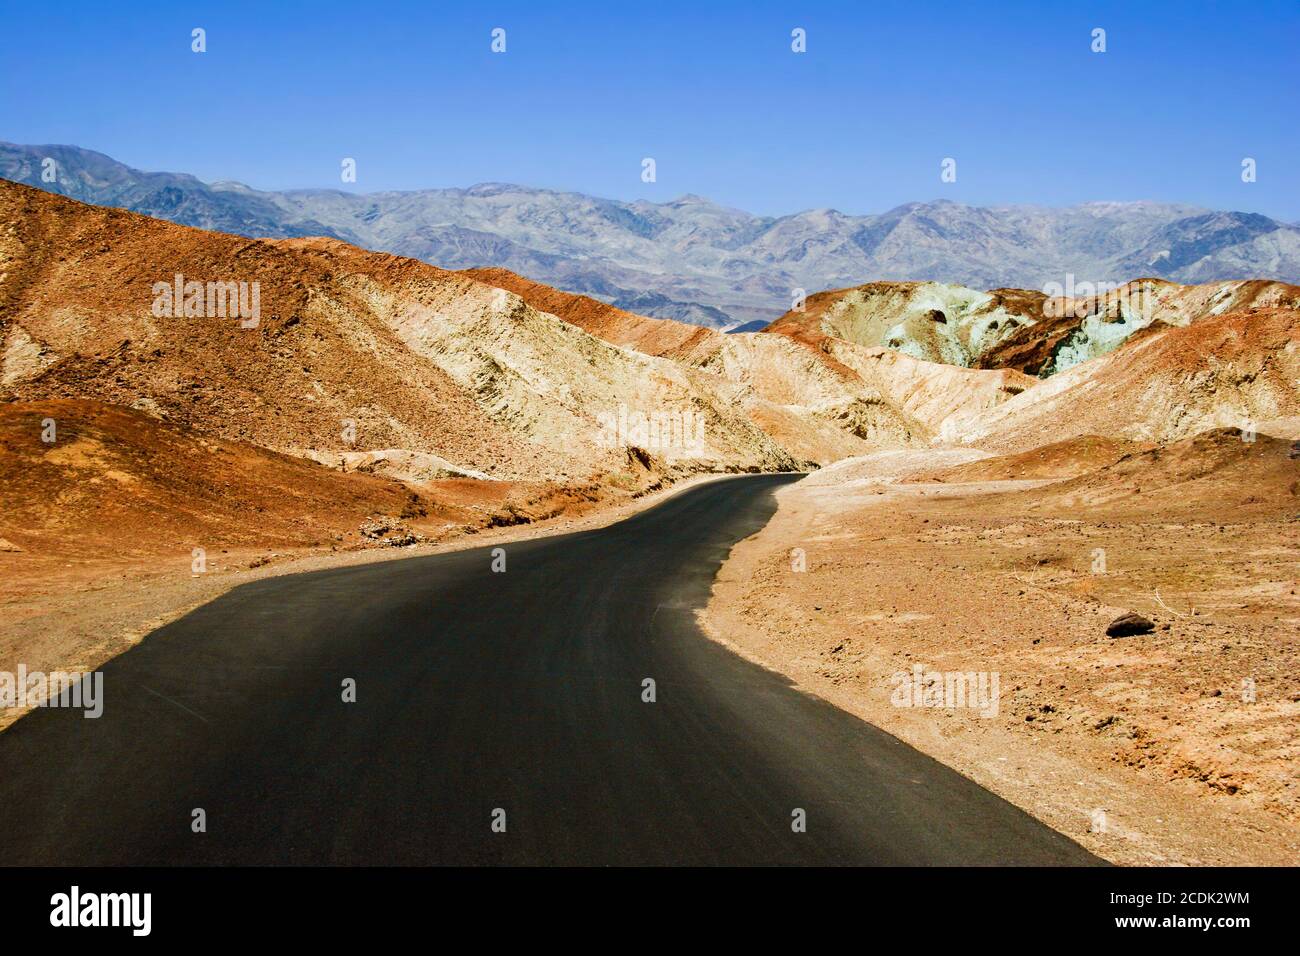 Lifeless landscape of the Death Valley Stock Photo